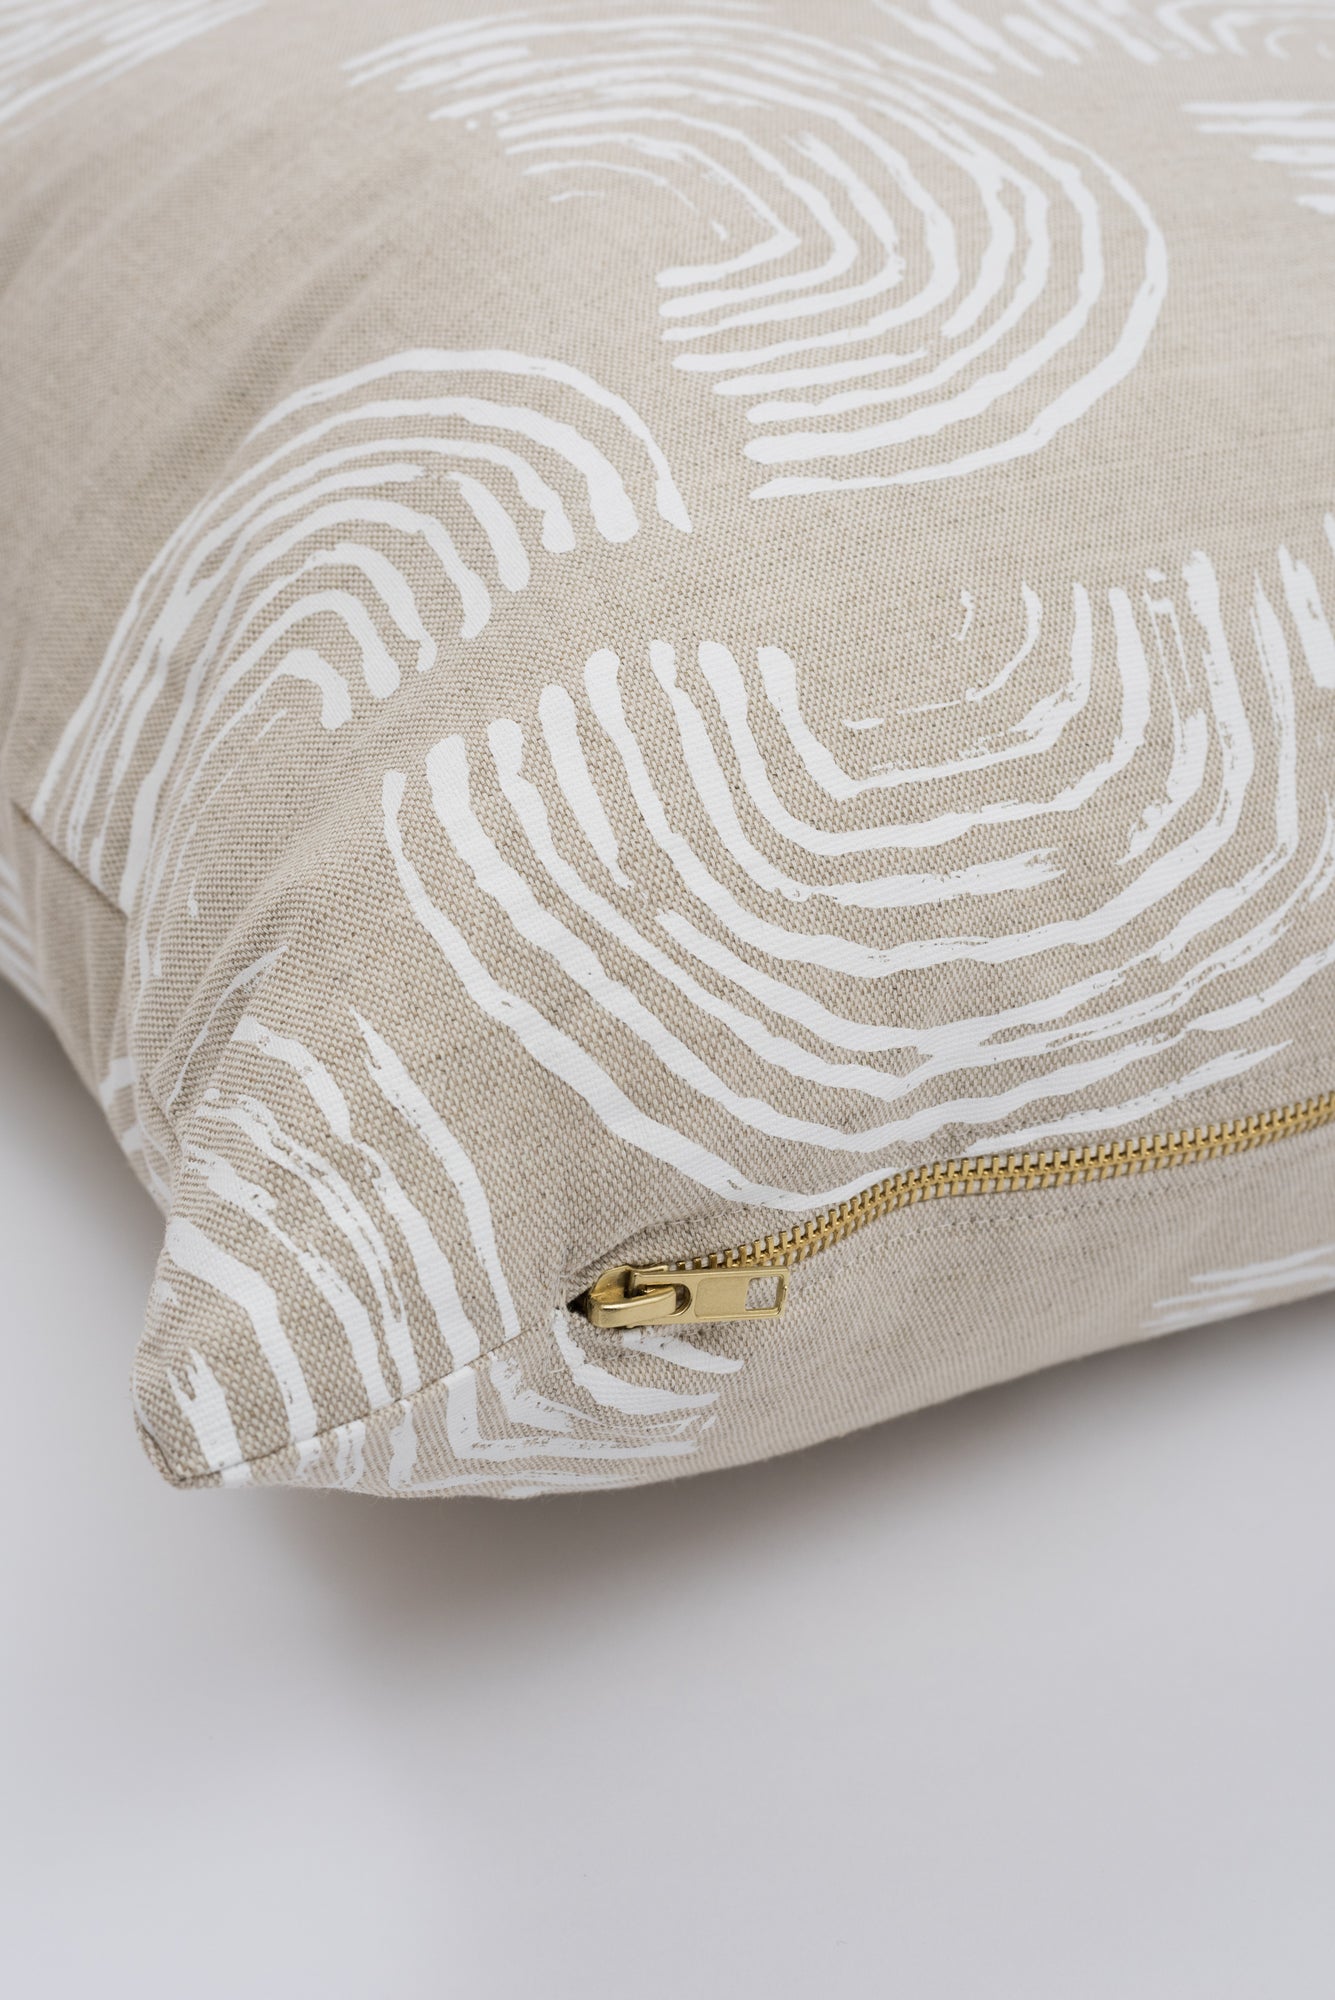 Squiggles Bolster Pillow